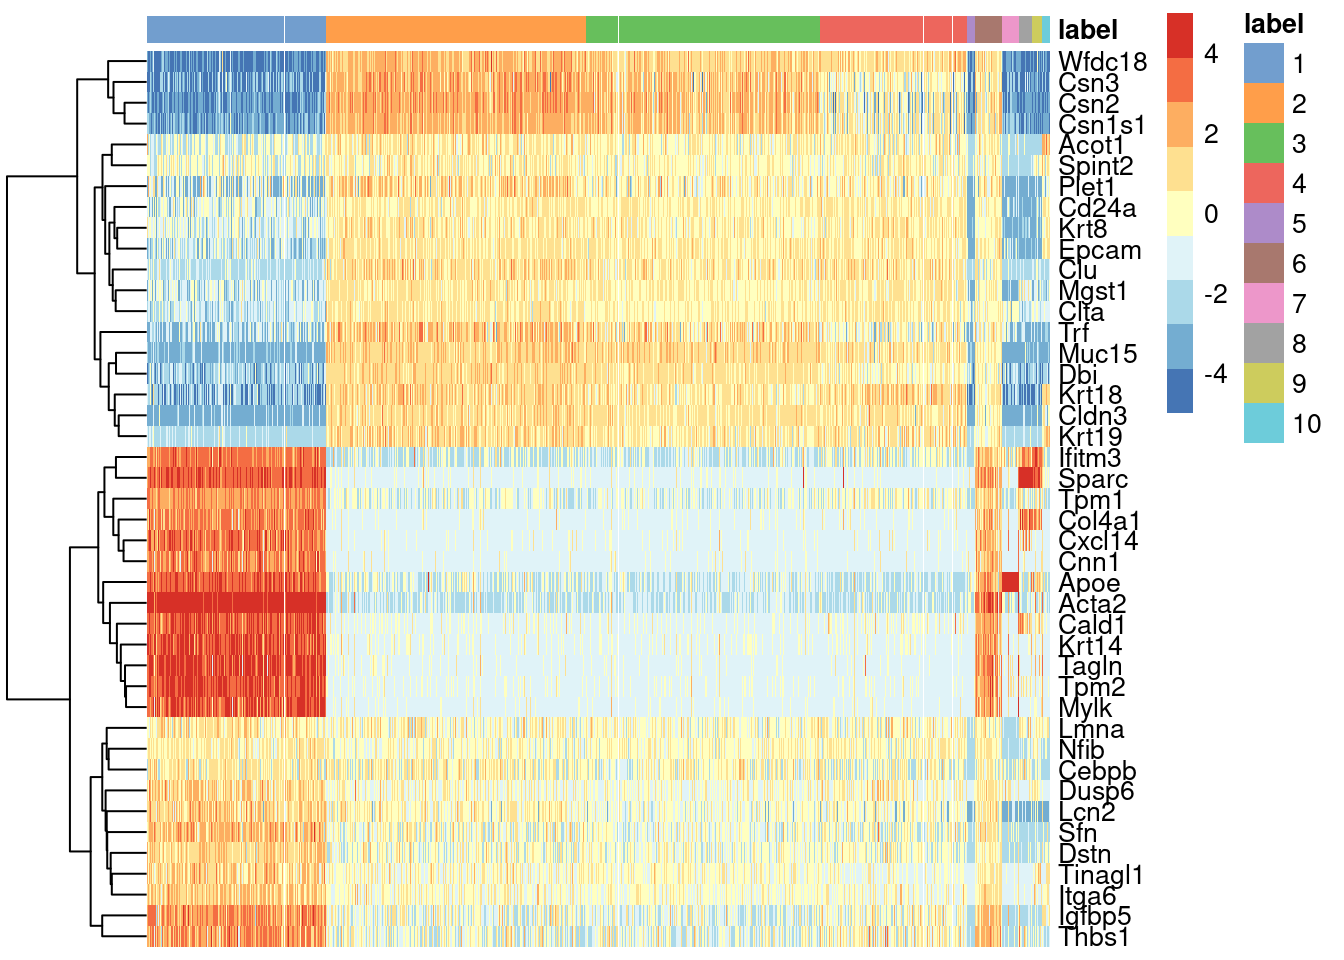 Heatmap of mean-centered and normalized log-expression values for the top set of markers for cluster 6 in the mammary gland dataset. Column colours represent the cluster to which each cell is assigned, as indicated by the legend.